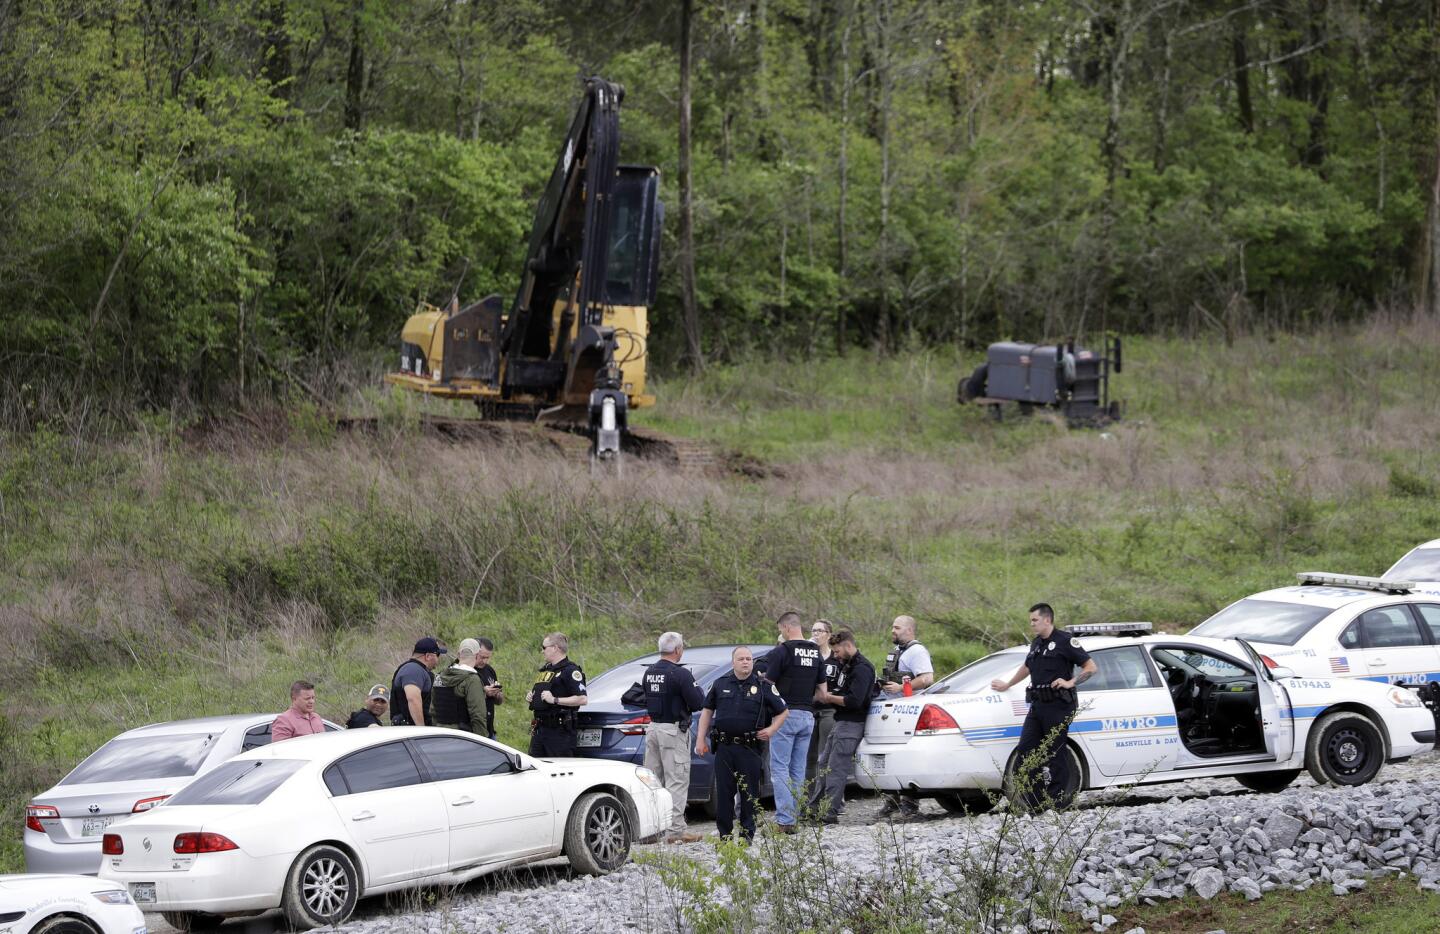 Police gather on a road next to construction equipment in a wooded area near where Waffle House shooting suspect Travis Reinking was captured on April 23, 2018, in Nashville, Tenn.